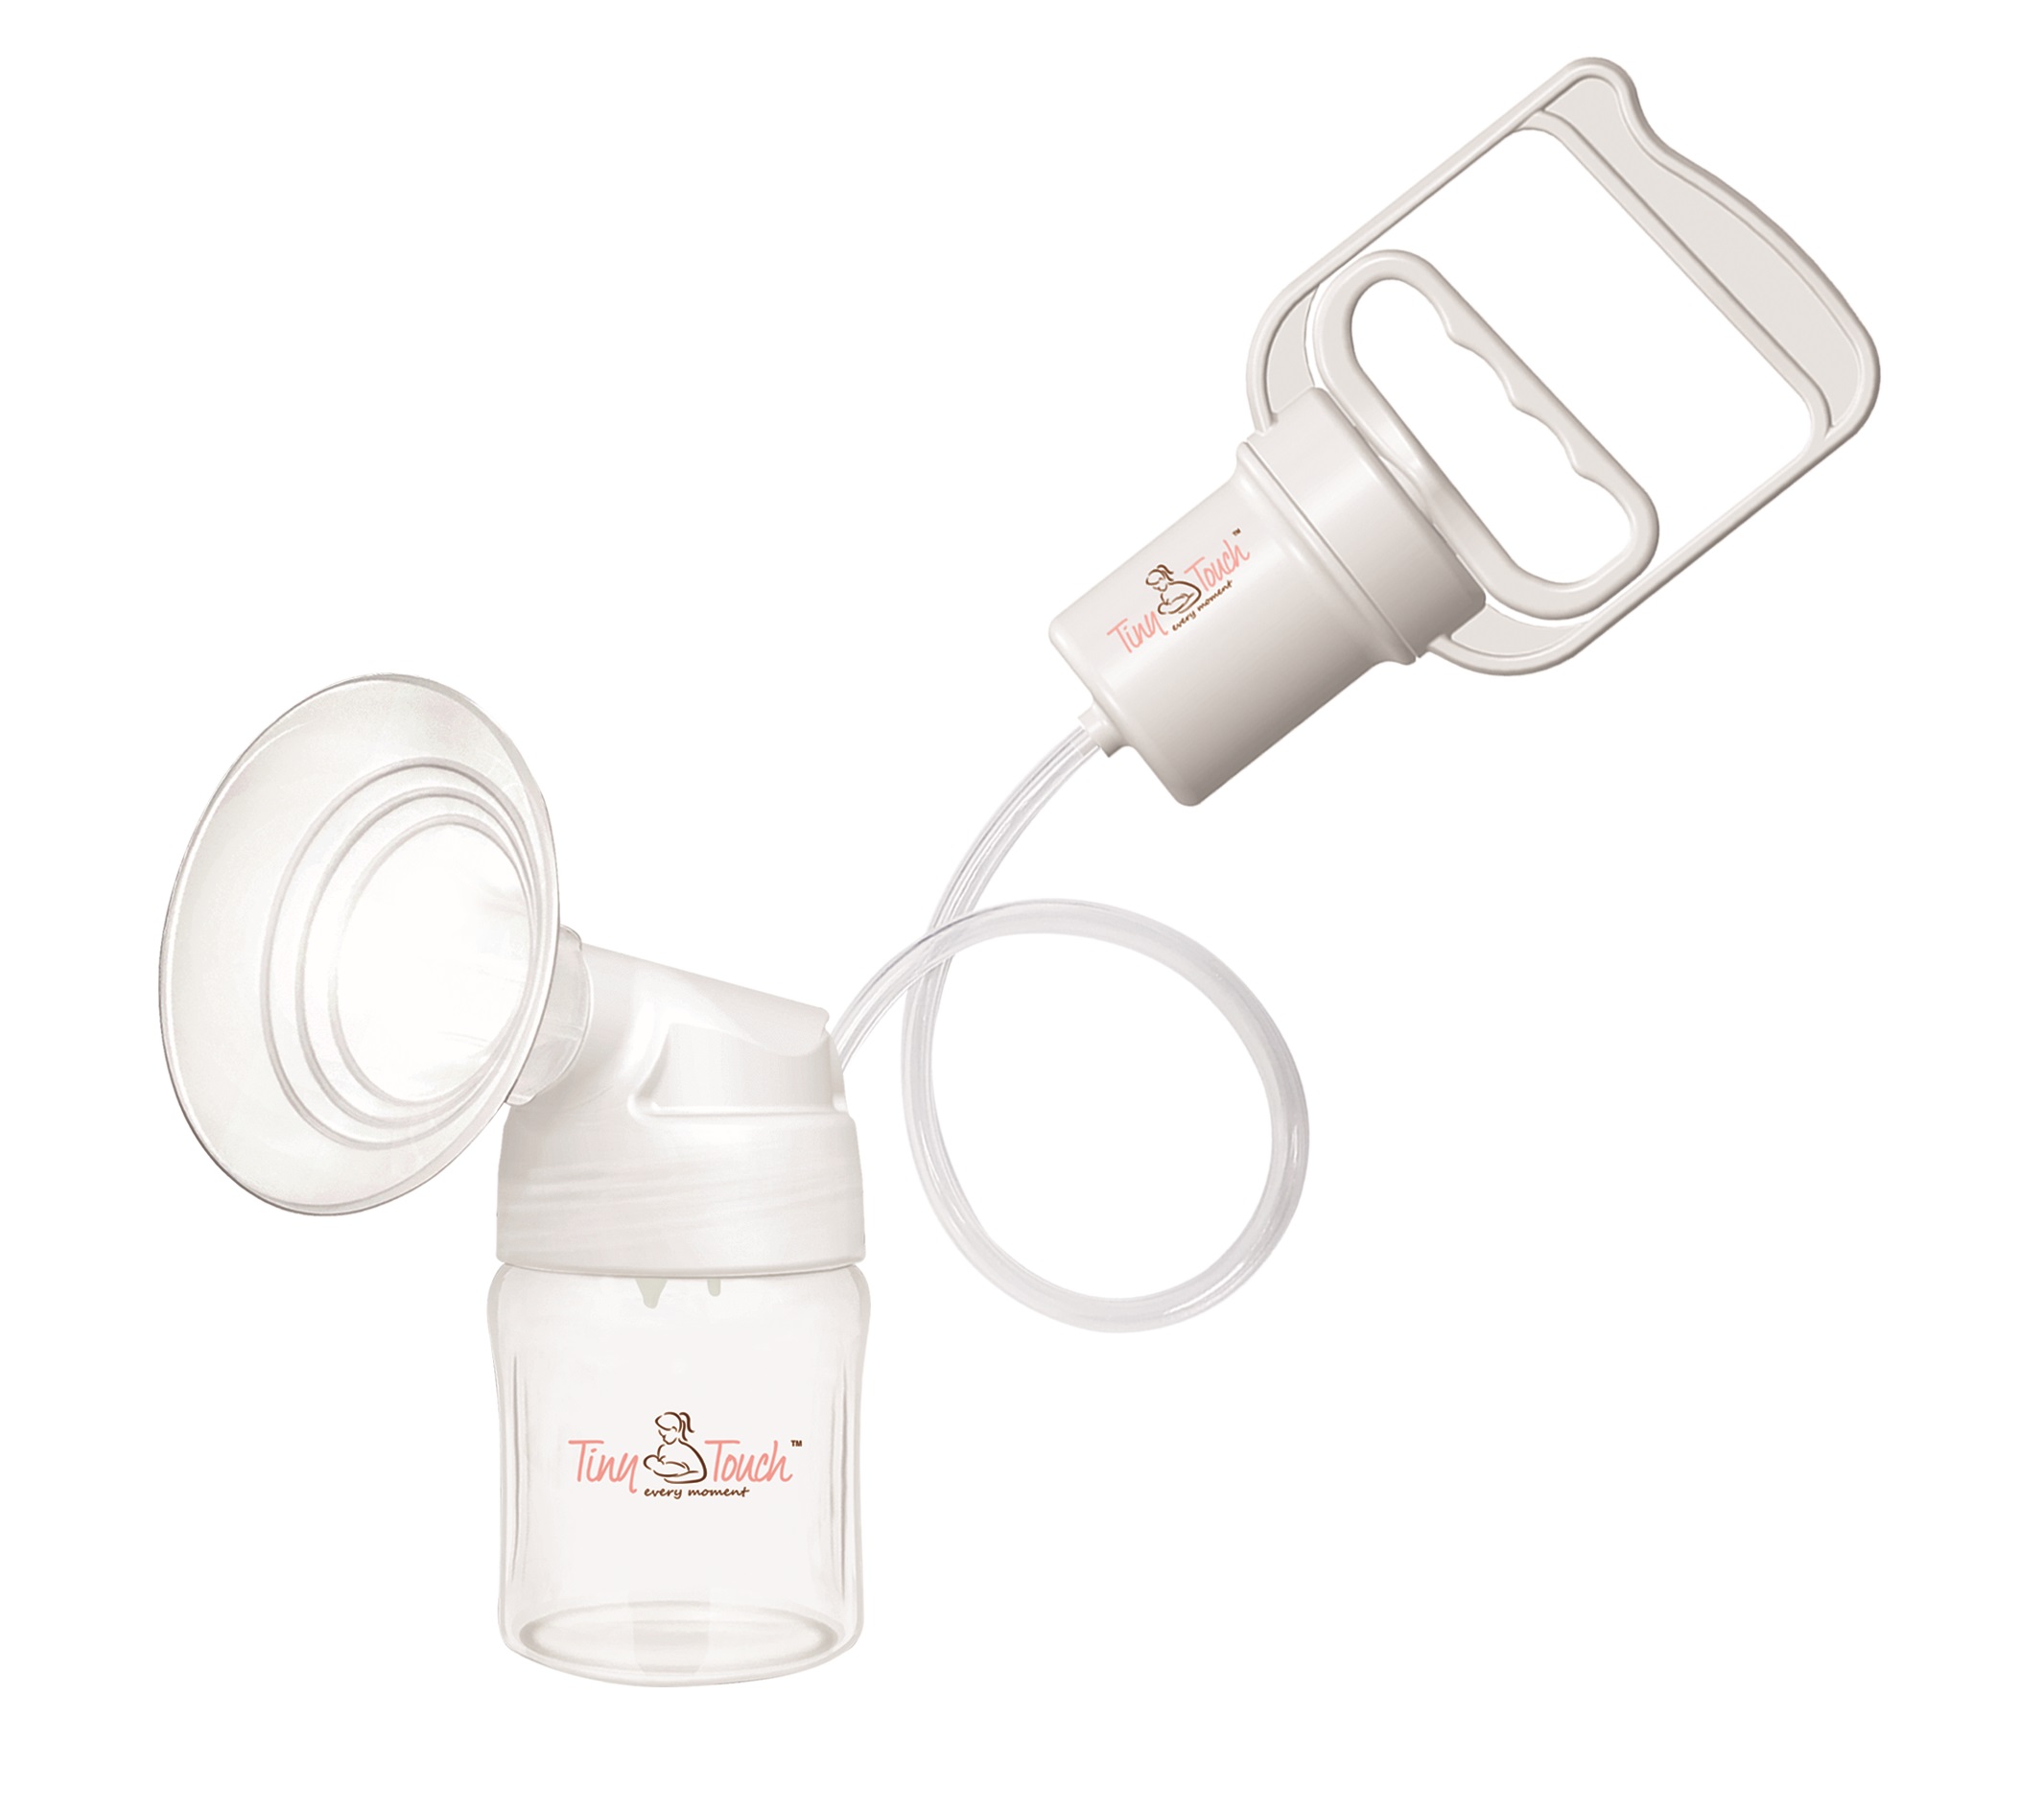 Tiny Touch Manual Breast Pump